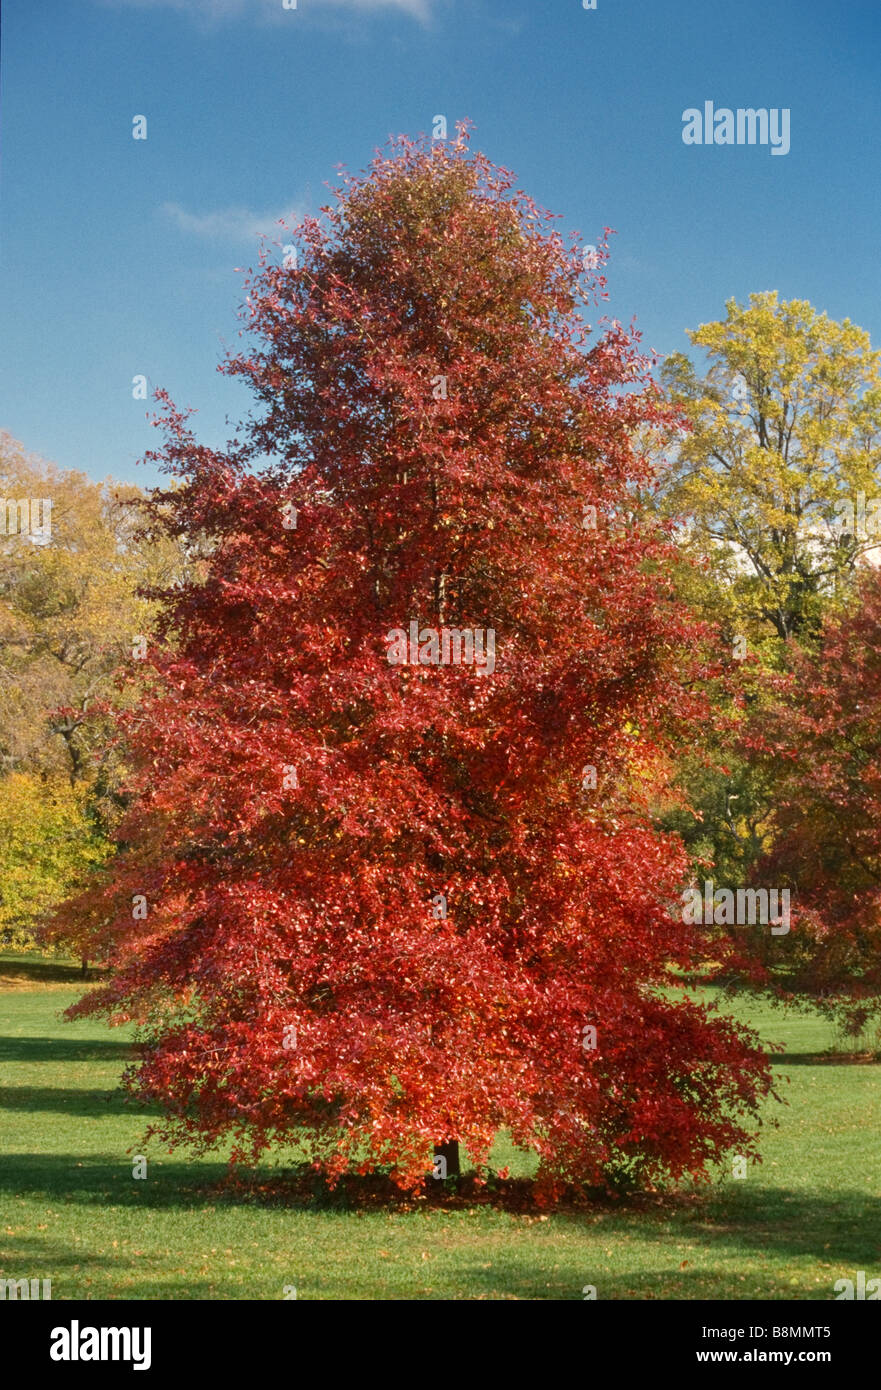 Nyssa sylvatica (black tupleo or sour gum) is a native North American tree, shown here in fall color. Its fruits atrract birds. Stock Photo